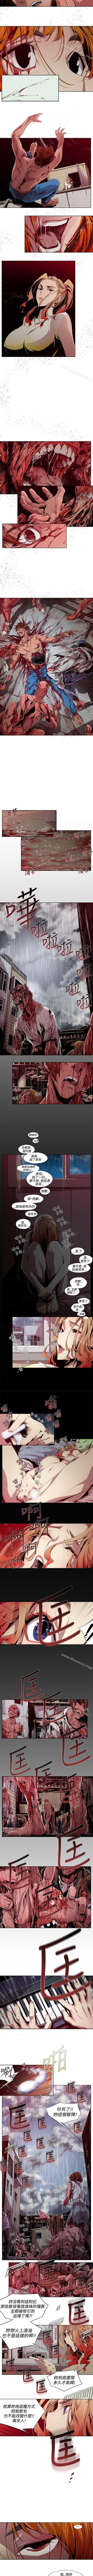 Farting 陰濕路 1-41 Blackmail - Page 8